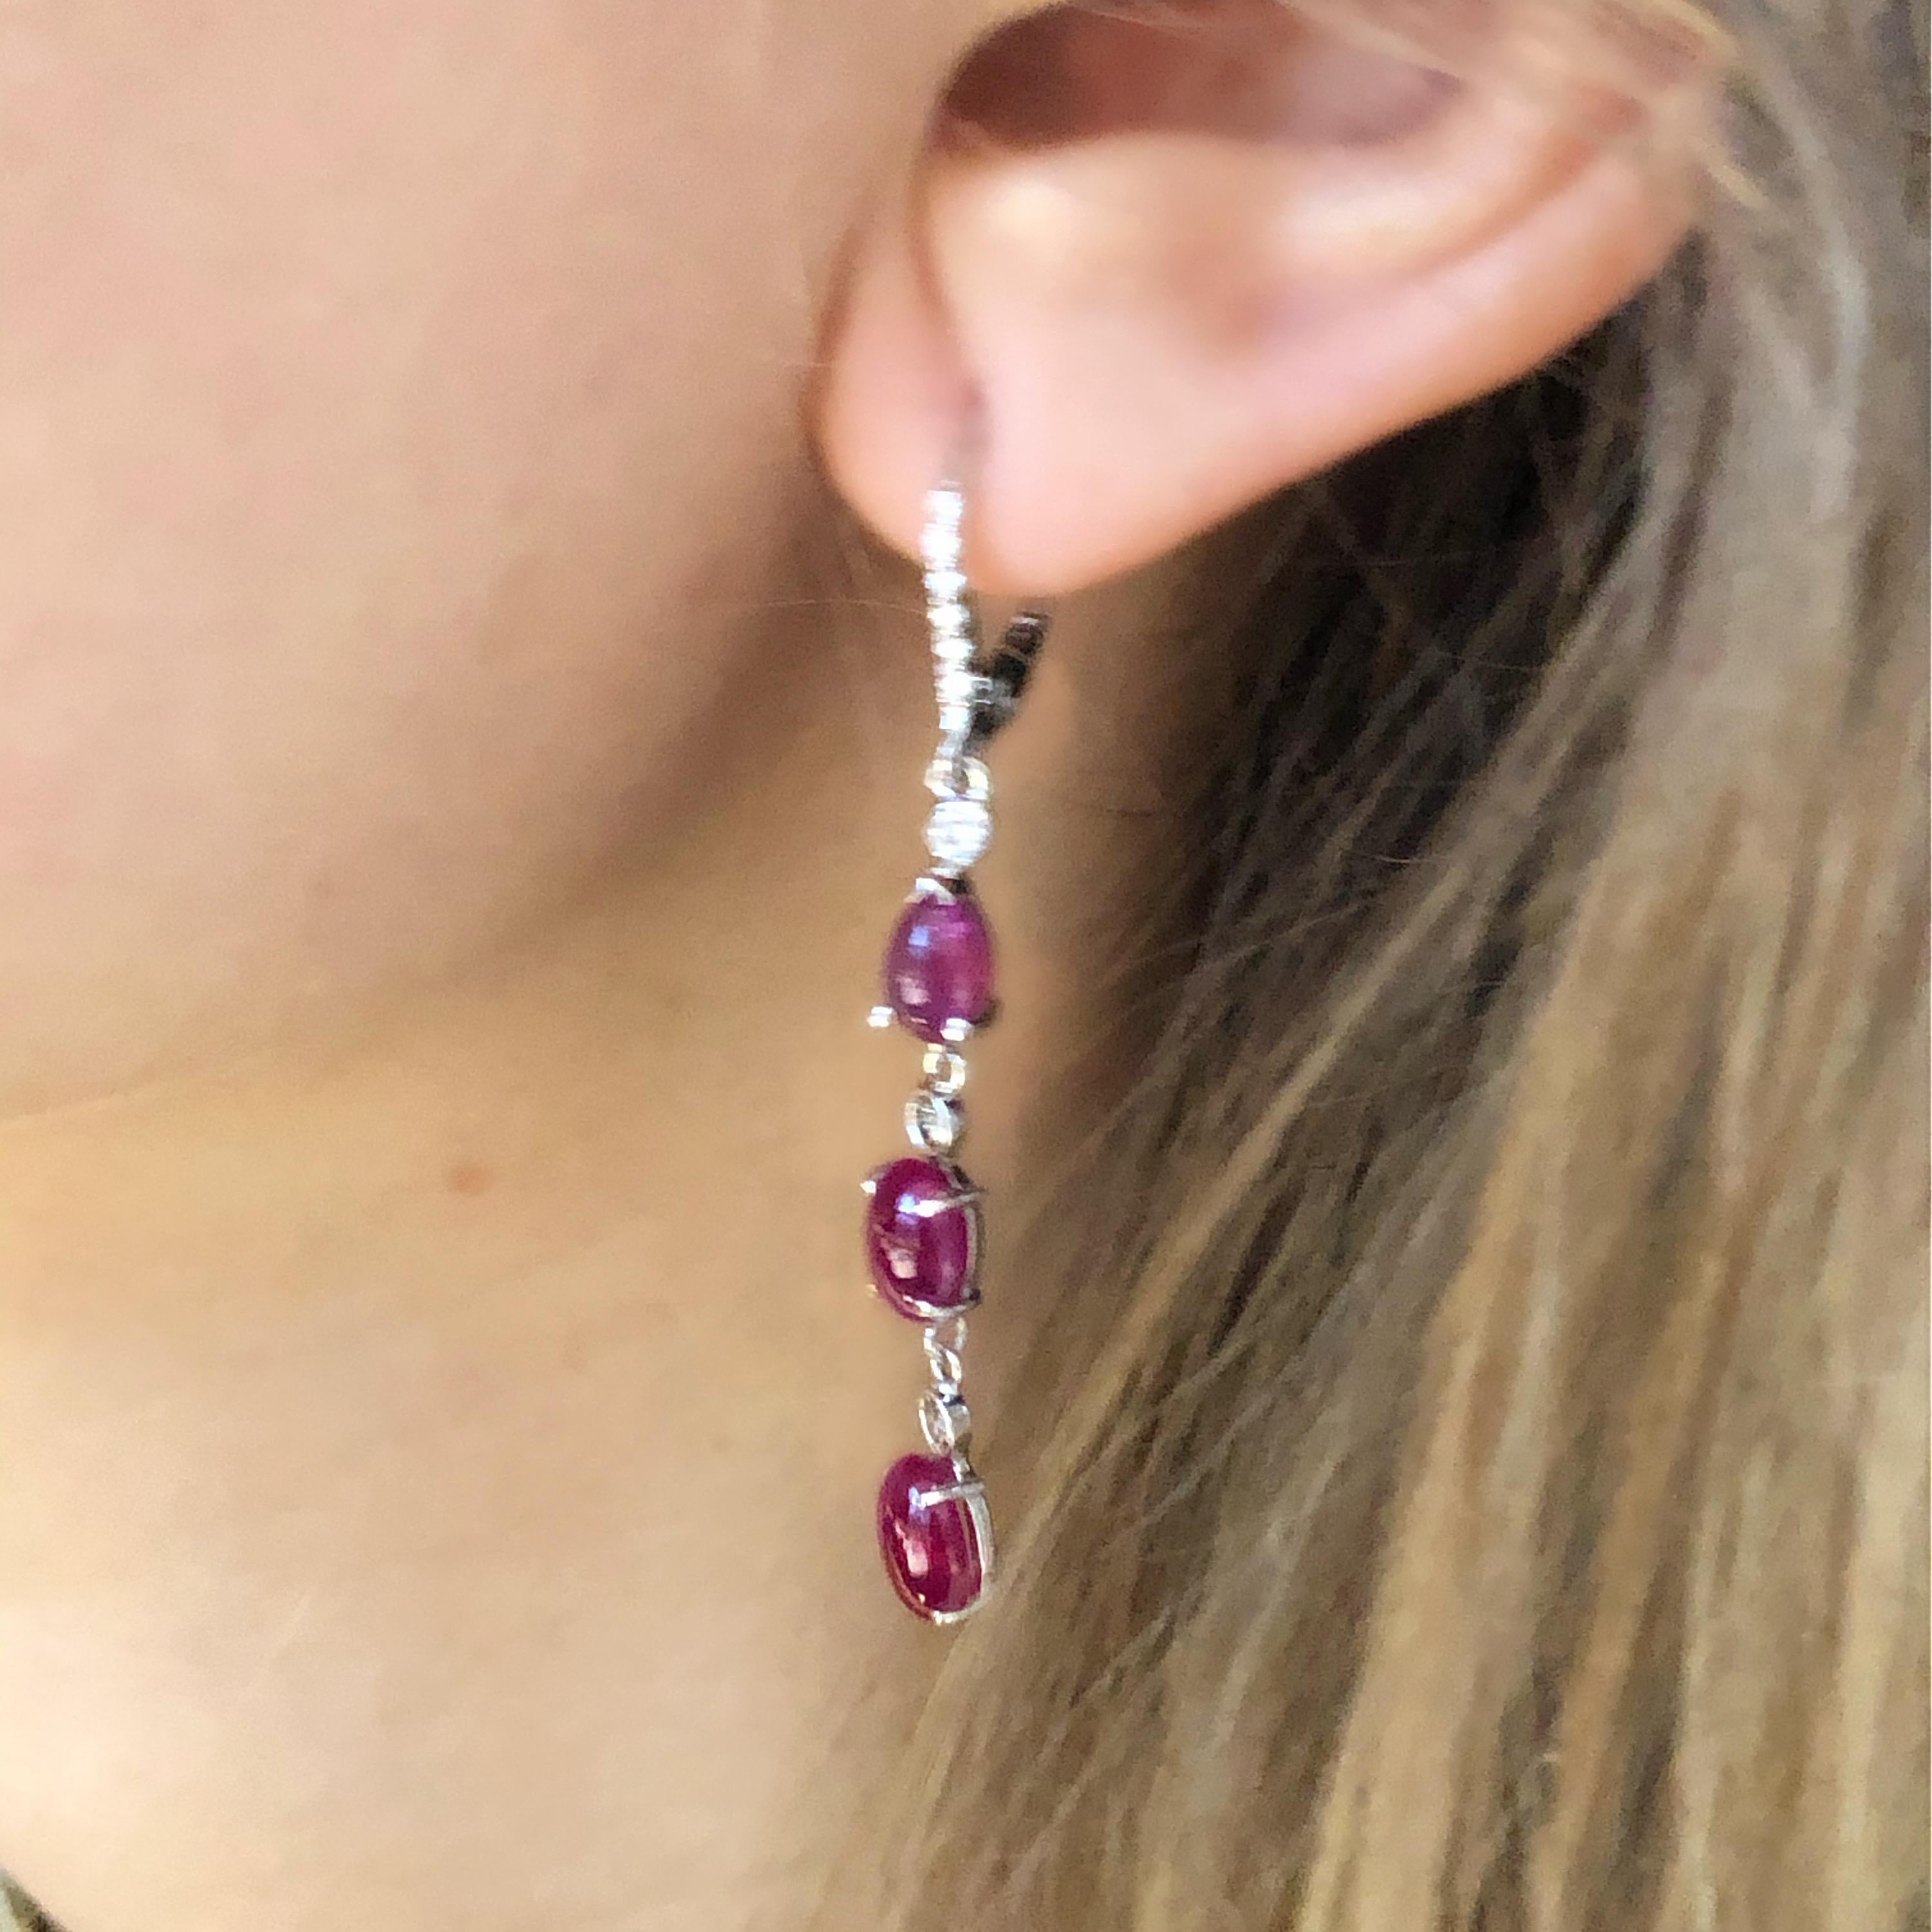 Oval Cut Diamond Gold Hoop Earrings with Burma Cabochon Ruby Weighing 8.27 Carat